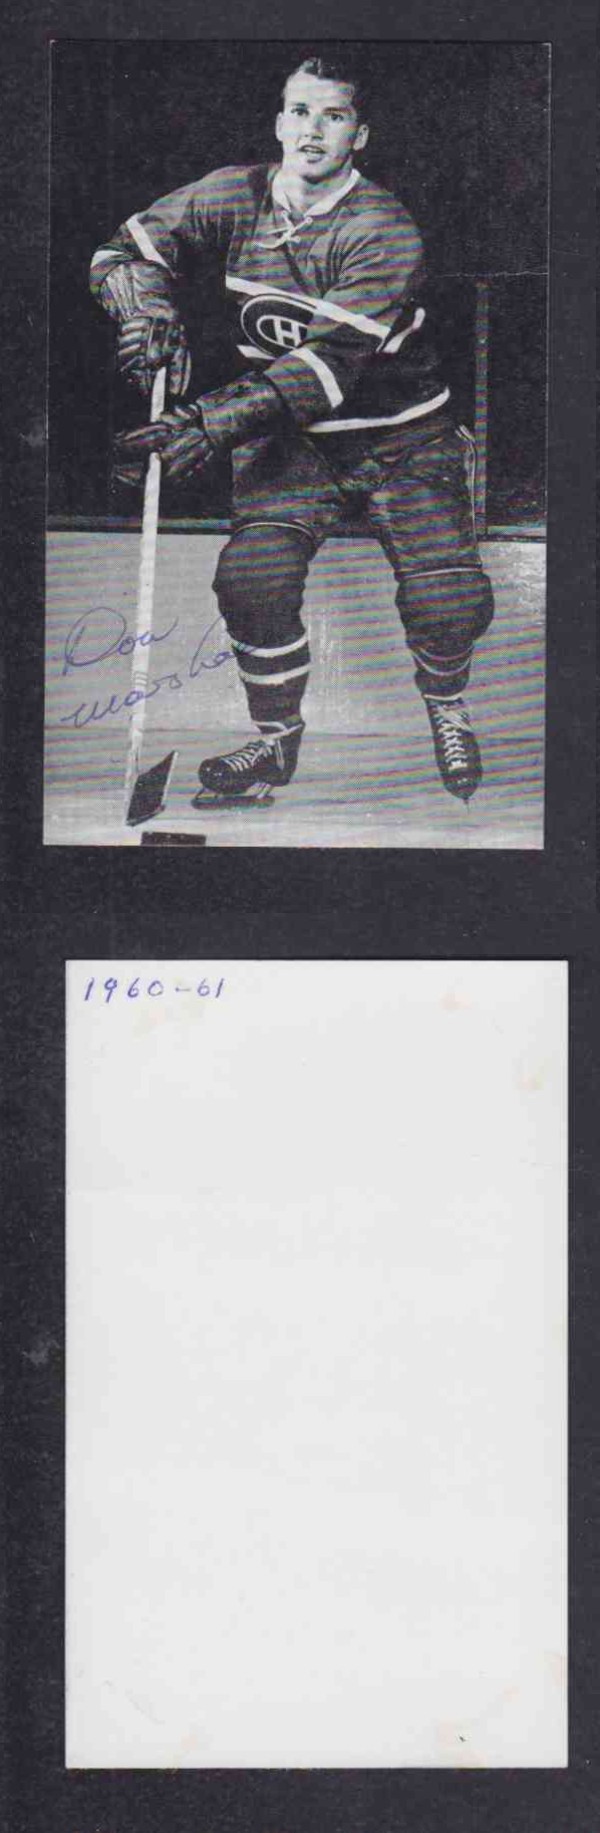 1960 'S MONTREAL CANADIENS D.MARSHALL  AUTOGRAPHED POST CARD  photo